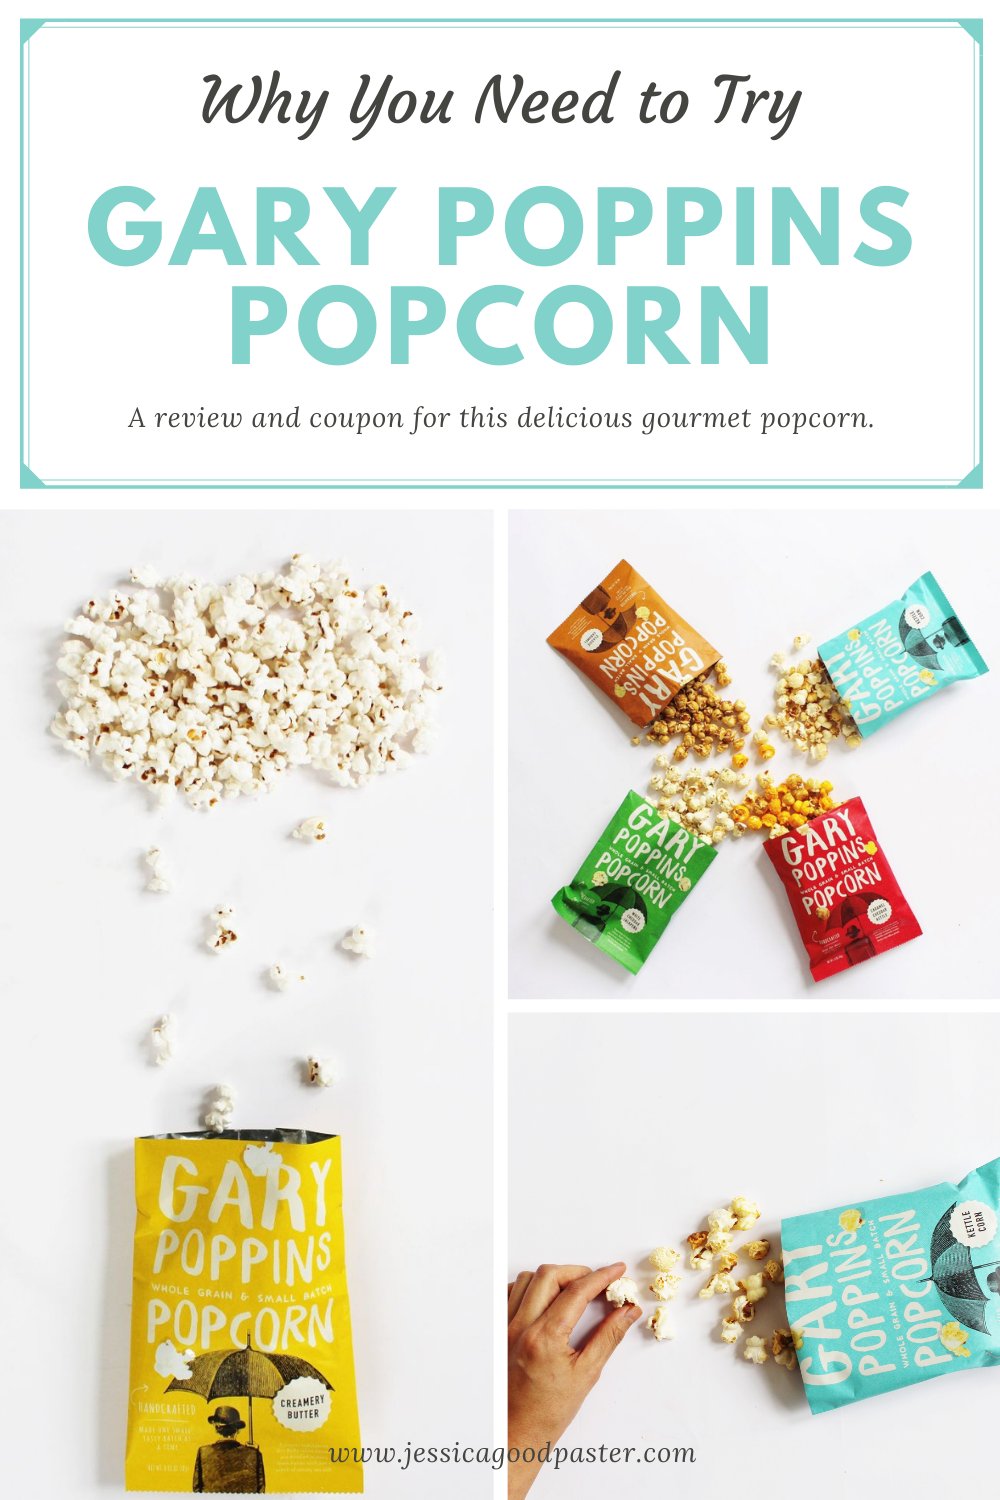 Learn all about this handcrafted gourmet popcorn in my Gary Poppins review. Find unique sweet and savory flavors made from yummy recipes and seasonings that are freshly popped and sent to your home. Bags and tins of multiple sizes make great teacher gifts, corporate gifts, wedding favors, stocking stuffers, or a perfect movie theater night at home! Plus, get a coupon code for a discount. #popcorn #gourmetpopcorn #snackideas #stockingstuffer #weddingfavor #giftbasket #teachergifts #giftideas